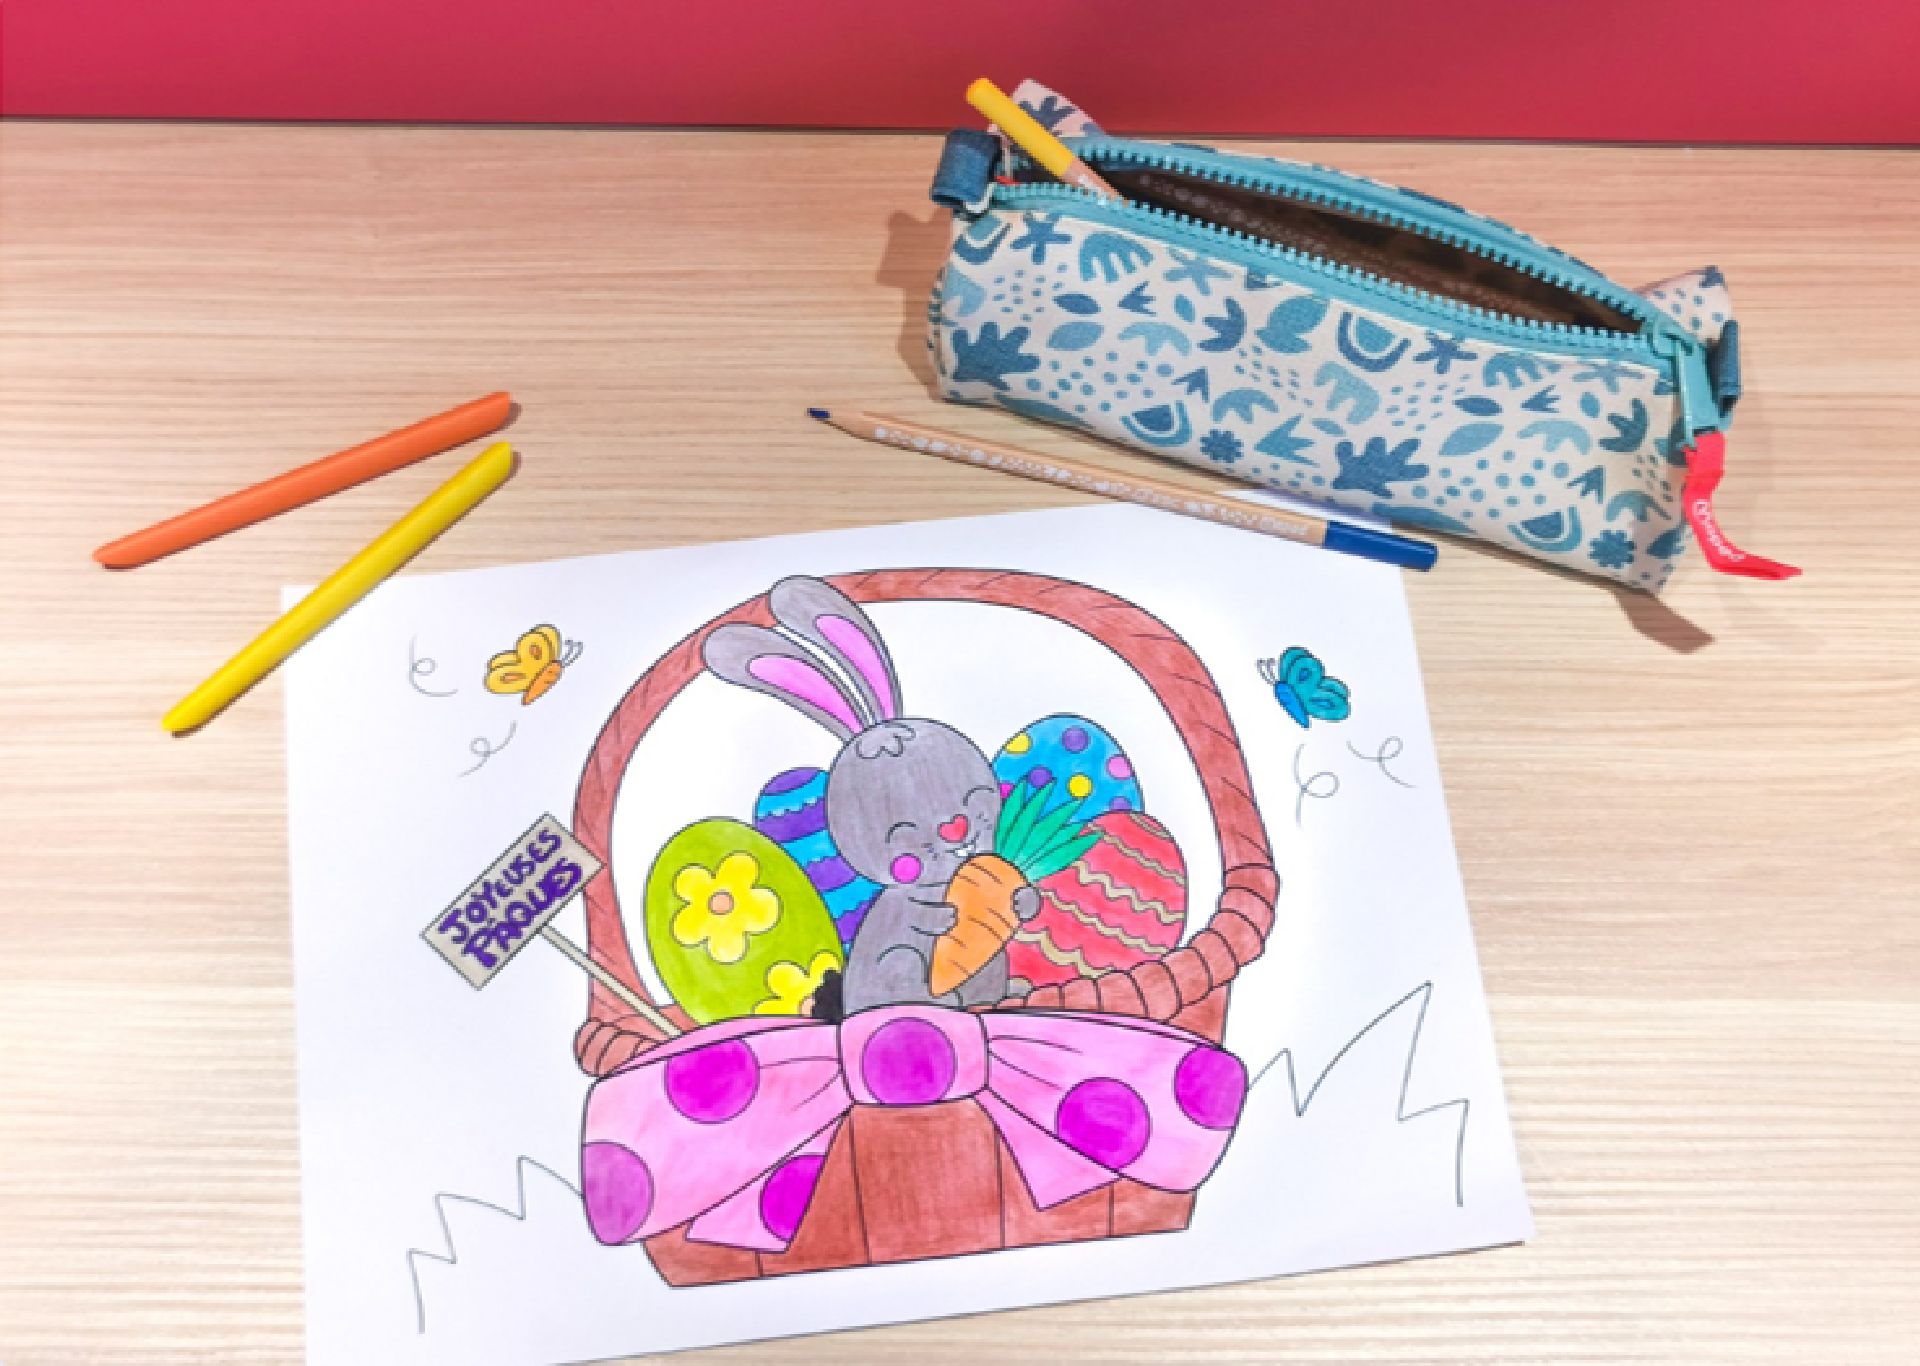 Easter colouring pages